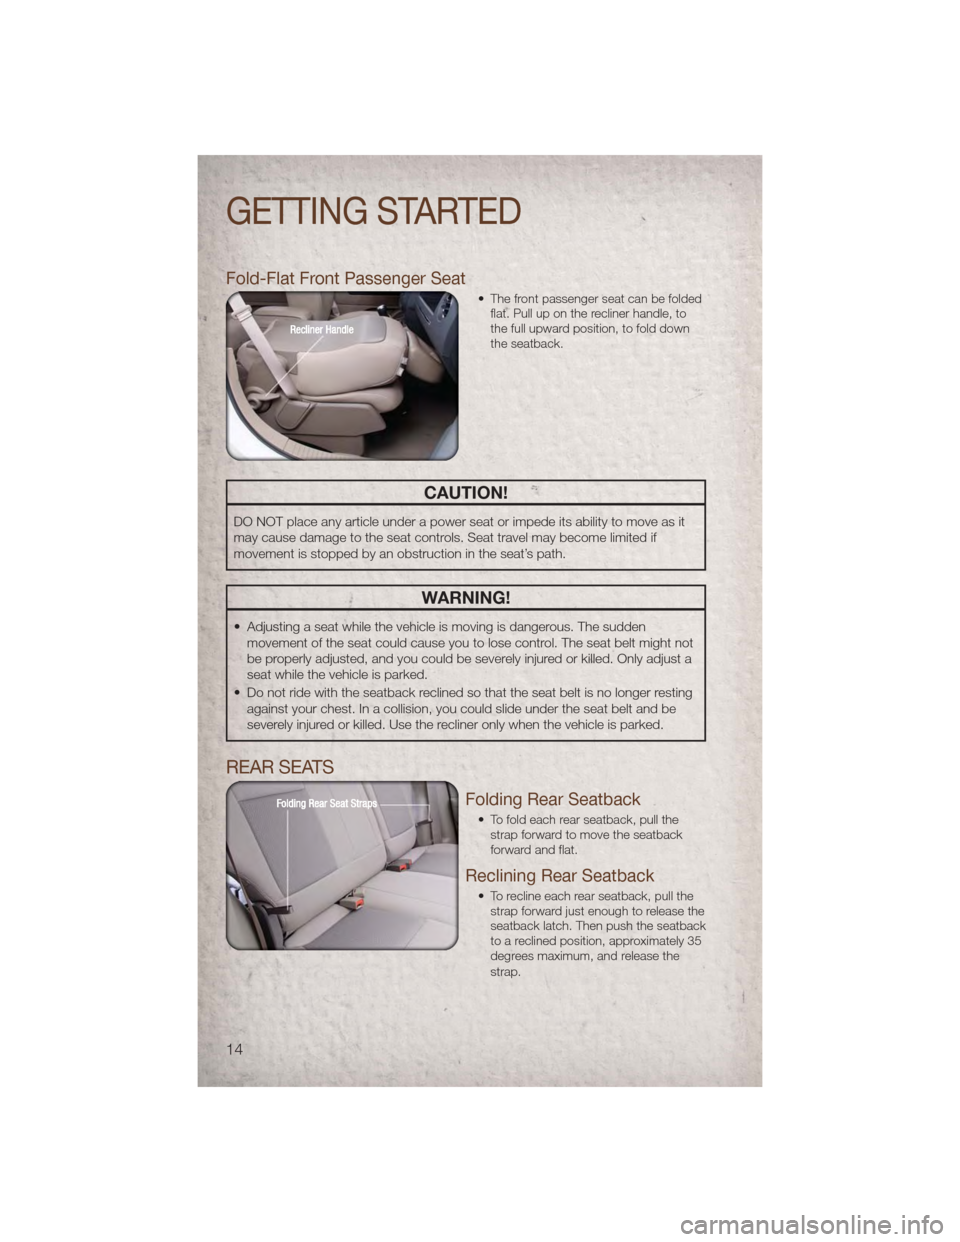 JEEP PATRIOT 2011 1.G Owners Manual Fold-Flat Front Passenger Seat
• The front passenger seat can be foldedflat. Pull up on the recliner handle, to
the full upward position, to fold down
the seatback.
CAUTION!
DO NOT place any article